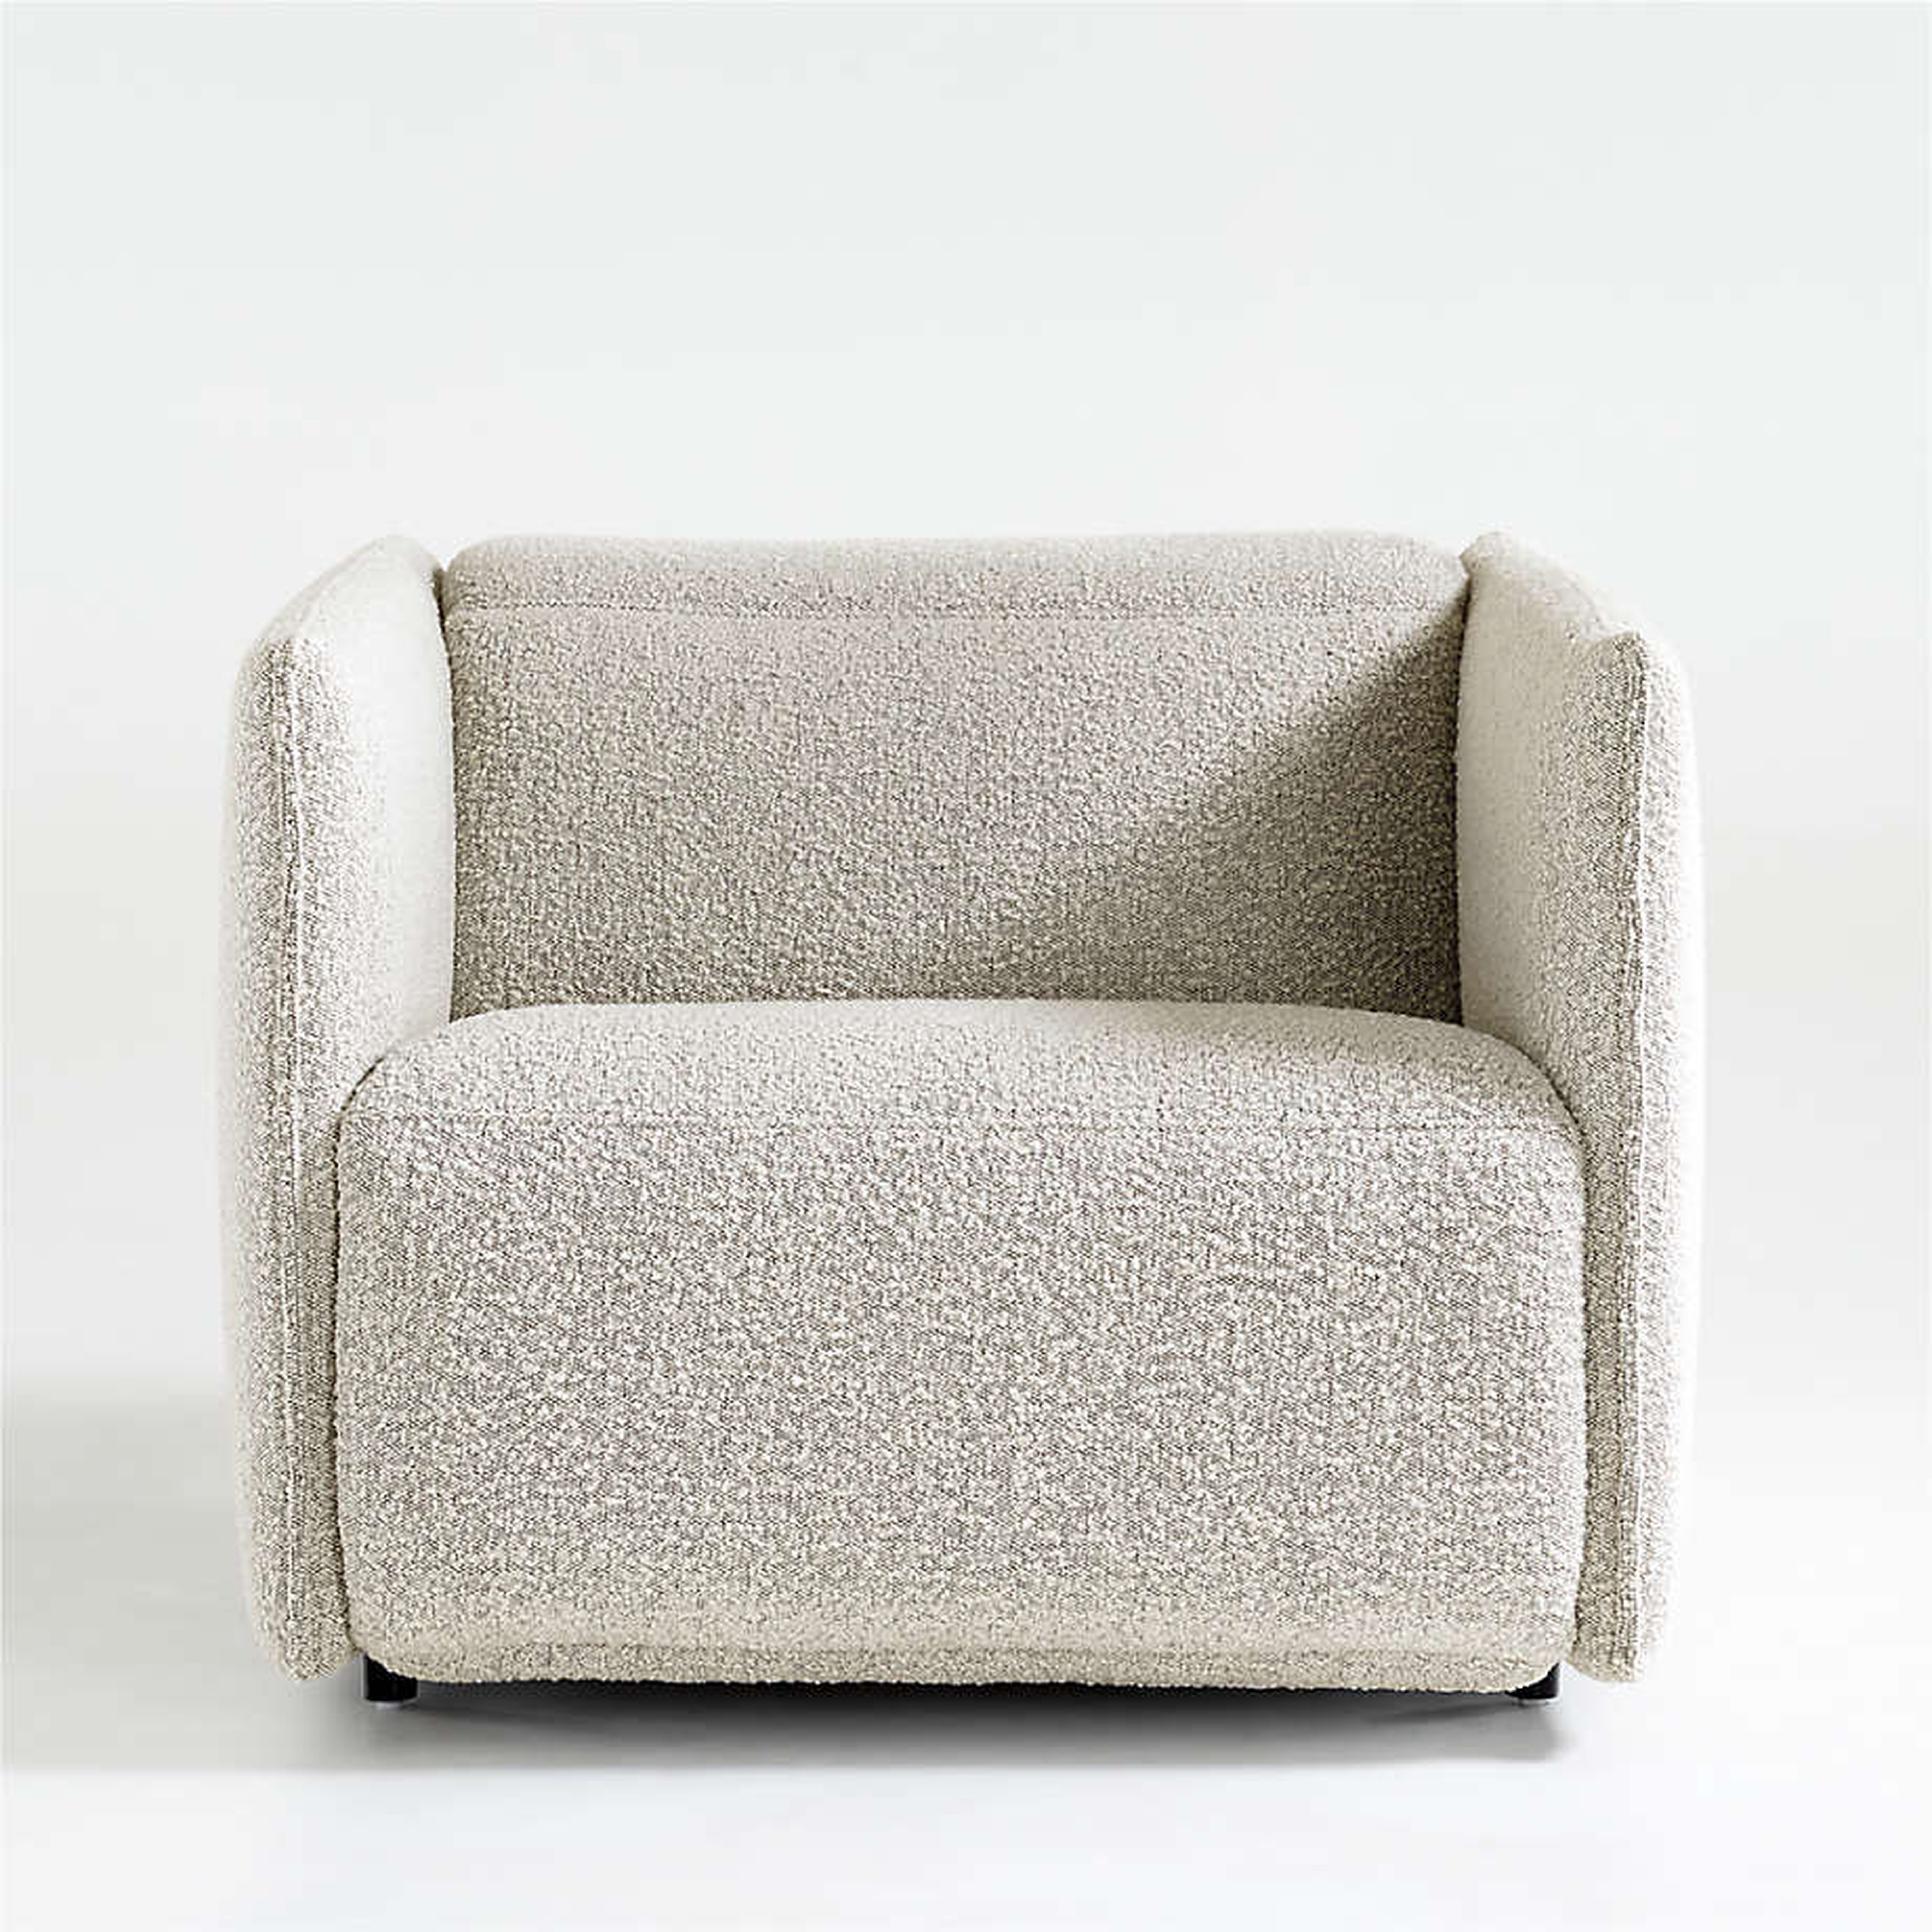 Leisure Power Recliner Accent Chair - Crate and Barrel